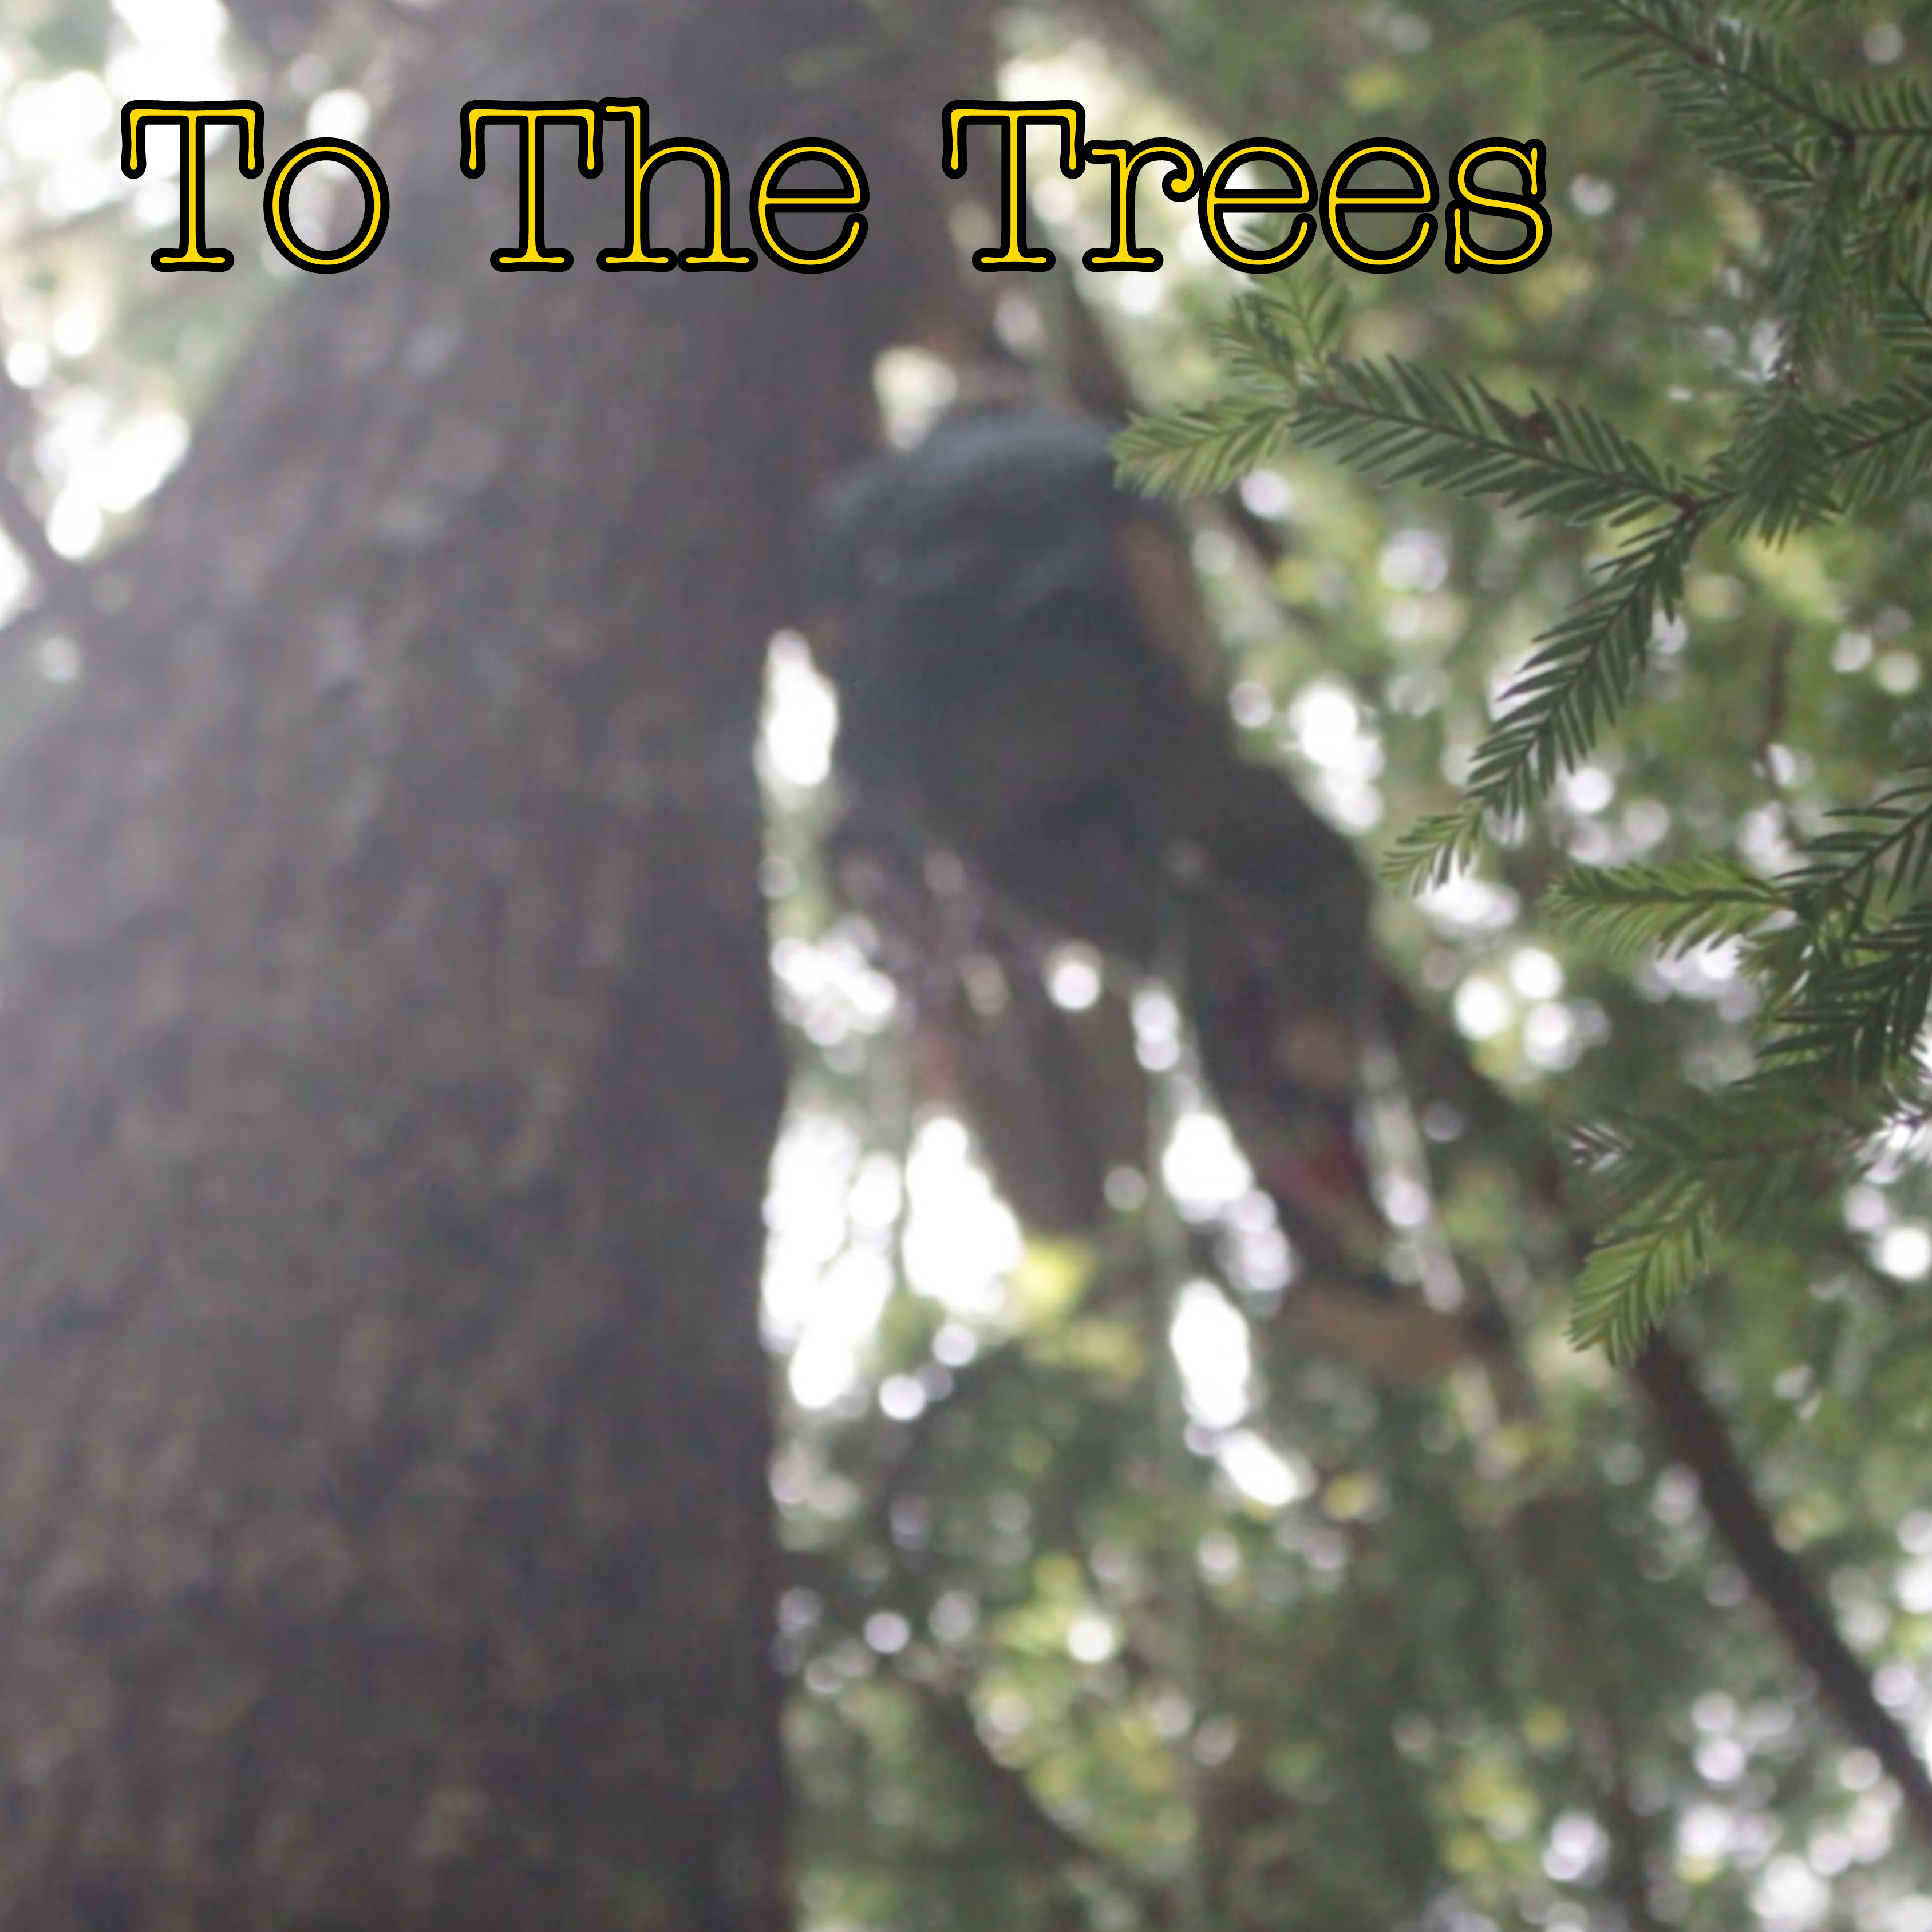 tree climber blurred in background, film title